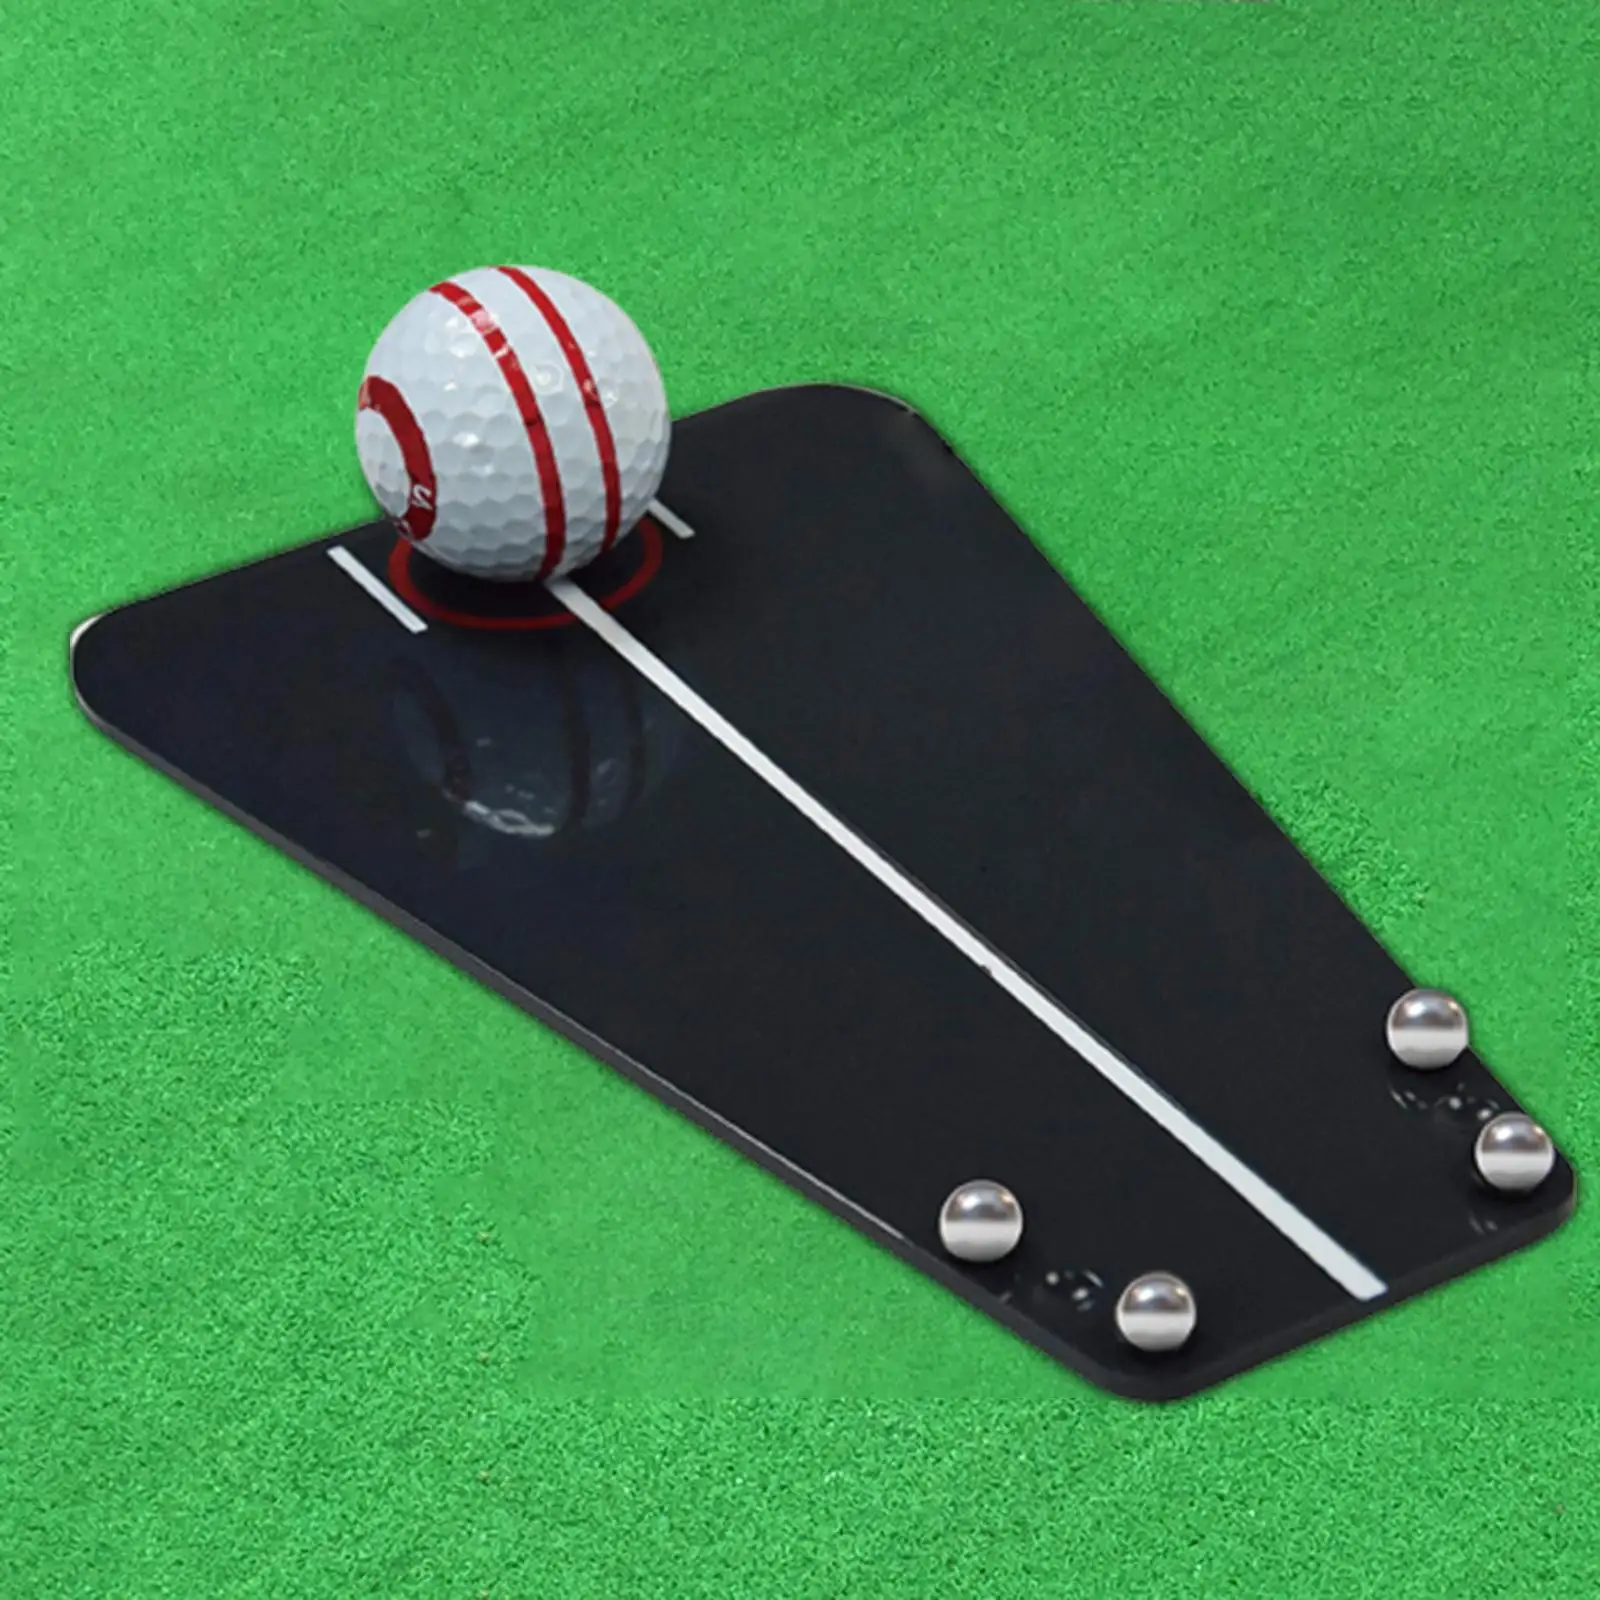 Golf Putting Tutor Swing Trainer Straight Practice Golf Putting Training Aid Improve Putting Skills for Outdoor Sports